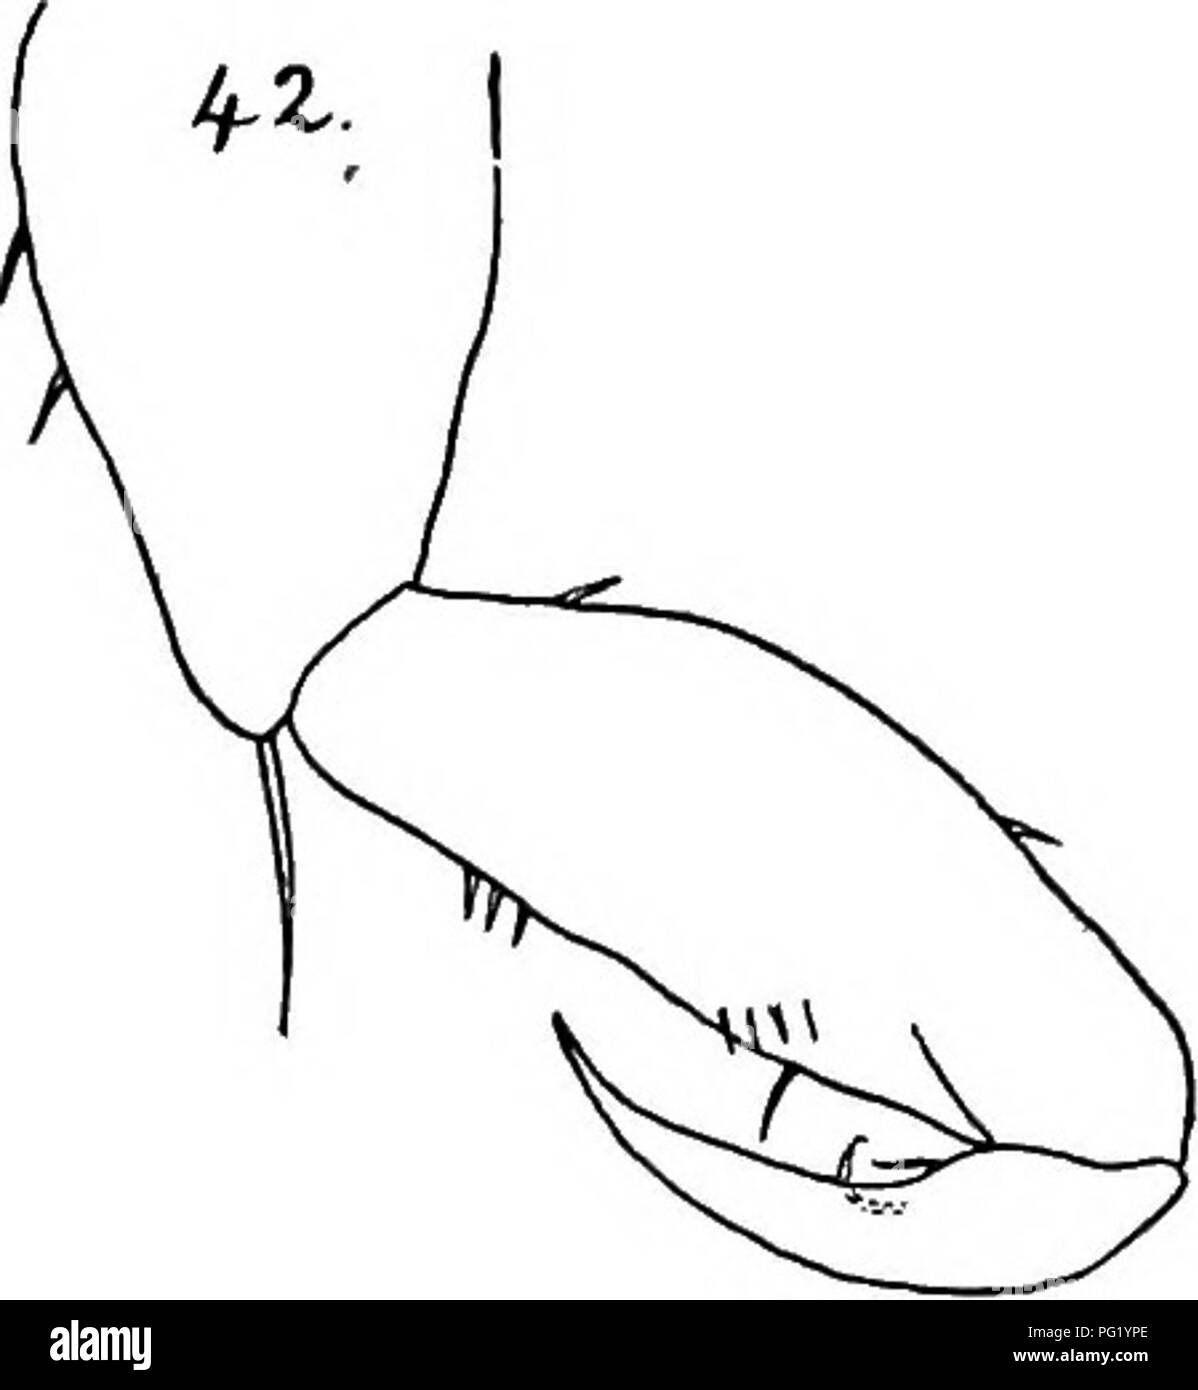 . Report of the Canadian Arctic Expedition 1913-18. Scientific expeditions. Marine Copepoda 31 K Second maxilliped (mp 2): like that of H. flexus, with simple fusiform hand, but the dactylus is shorter than the hand as 2: 3 (fig. 42).. Fig. 42. Harpacticus superflexus. Second maxilliped. The first thoracic foot (p 1) is like that of H. flexus, both rami two-jointed, Ri about as long as the proximal joint of Re; Ri 2 with a claw-like spine and two setse at the end, Ri 1 with distally placed si (Fig. 43); Re 2 ending with three curved claws and a slender seta. In the second thoracic foot (p 2 9) Stock Photo